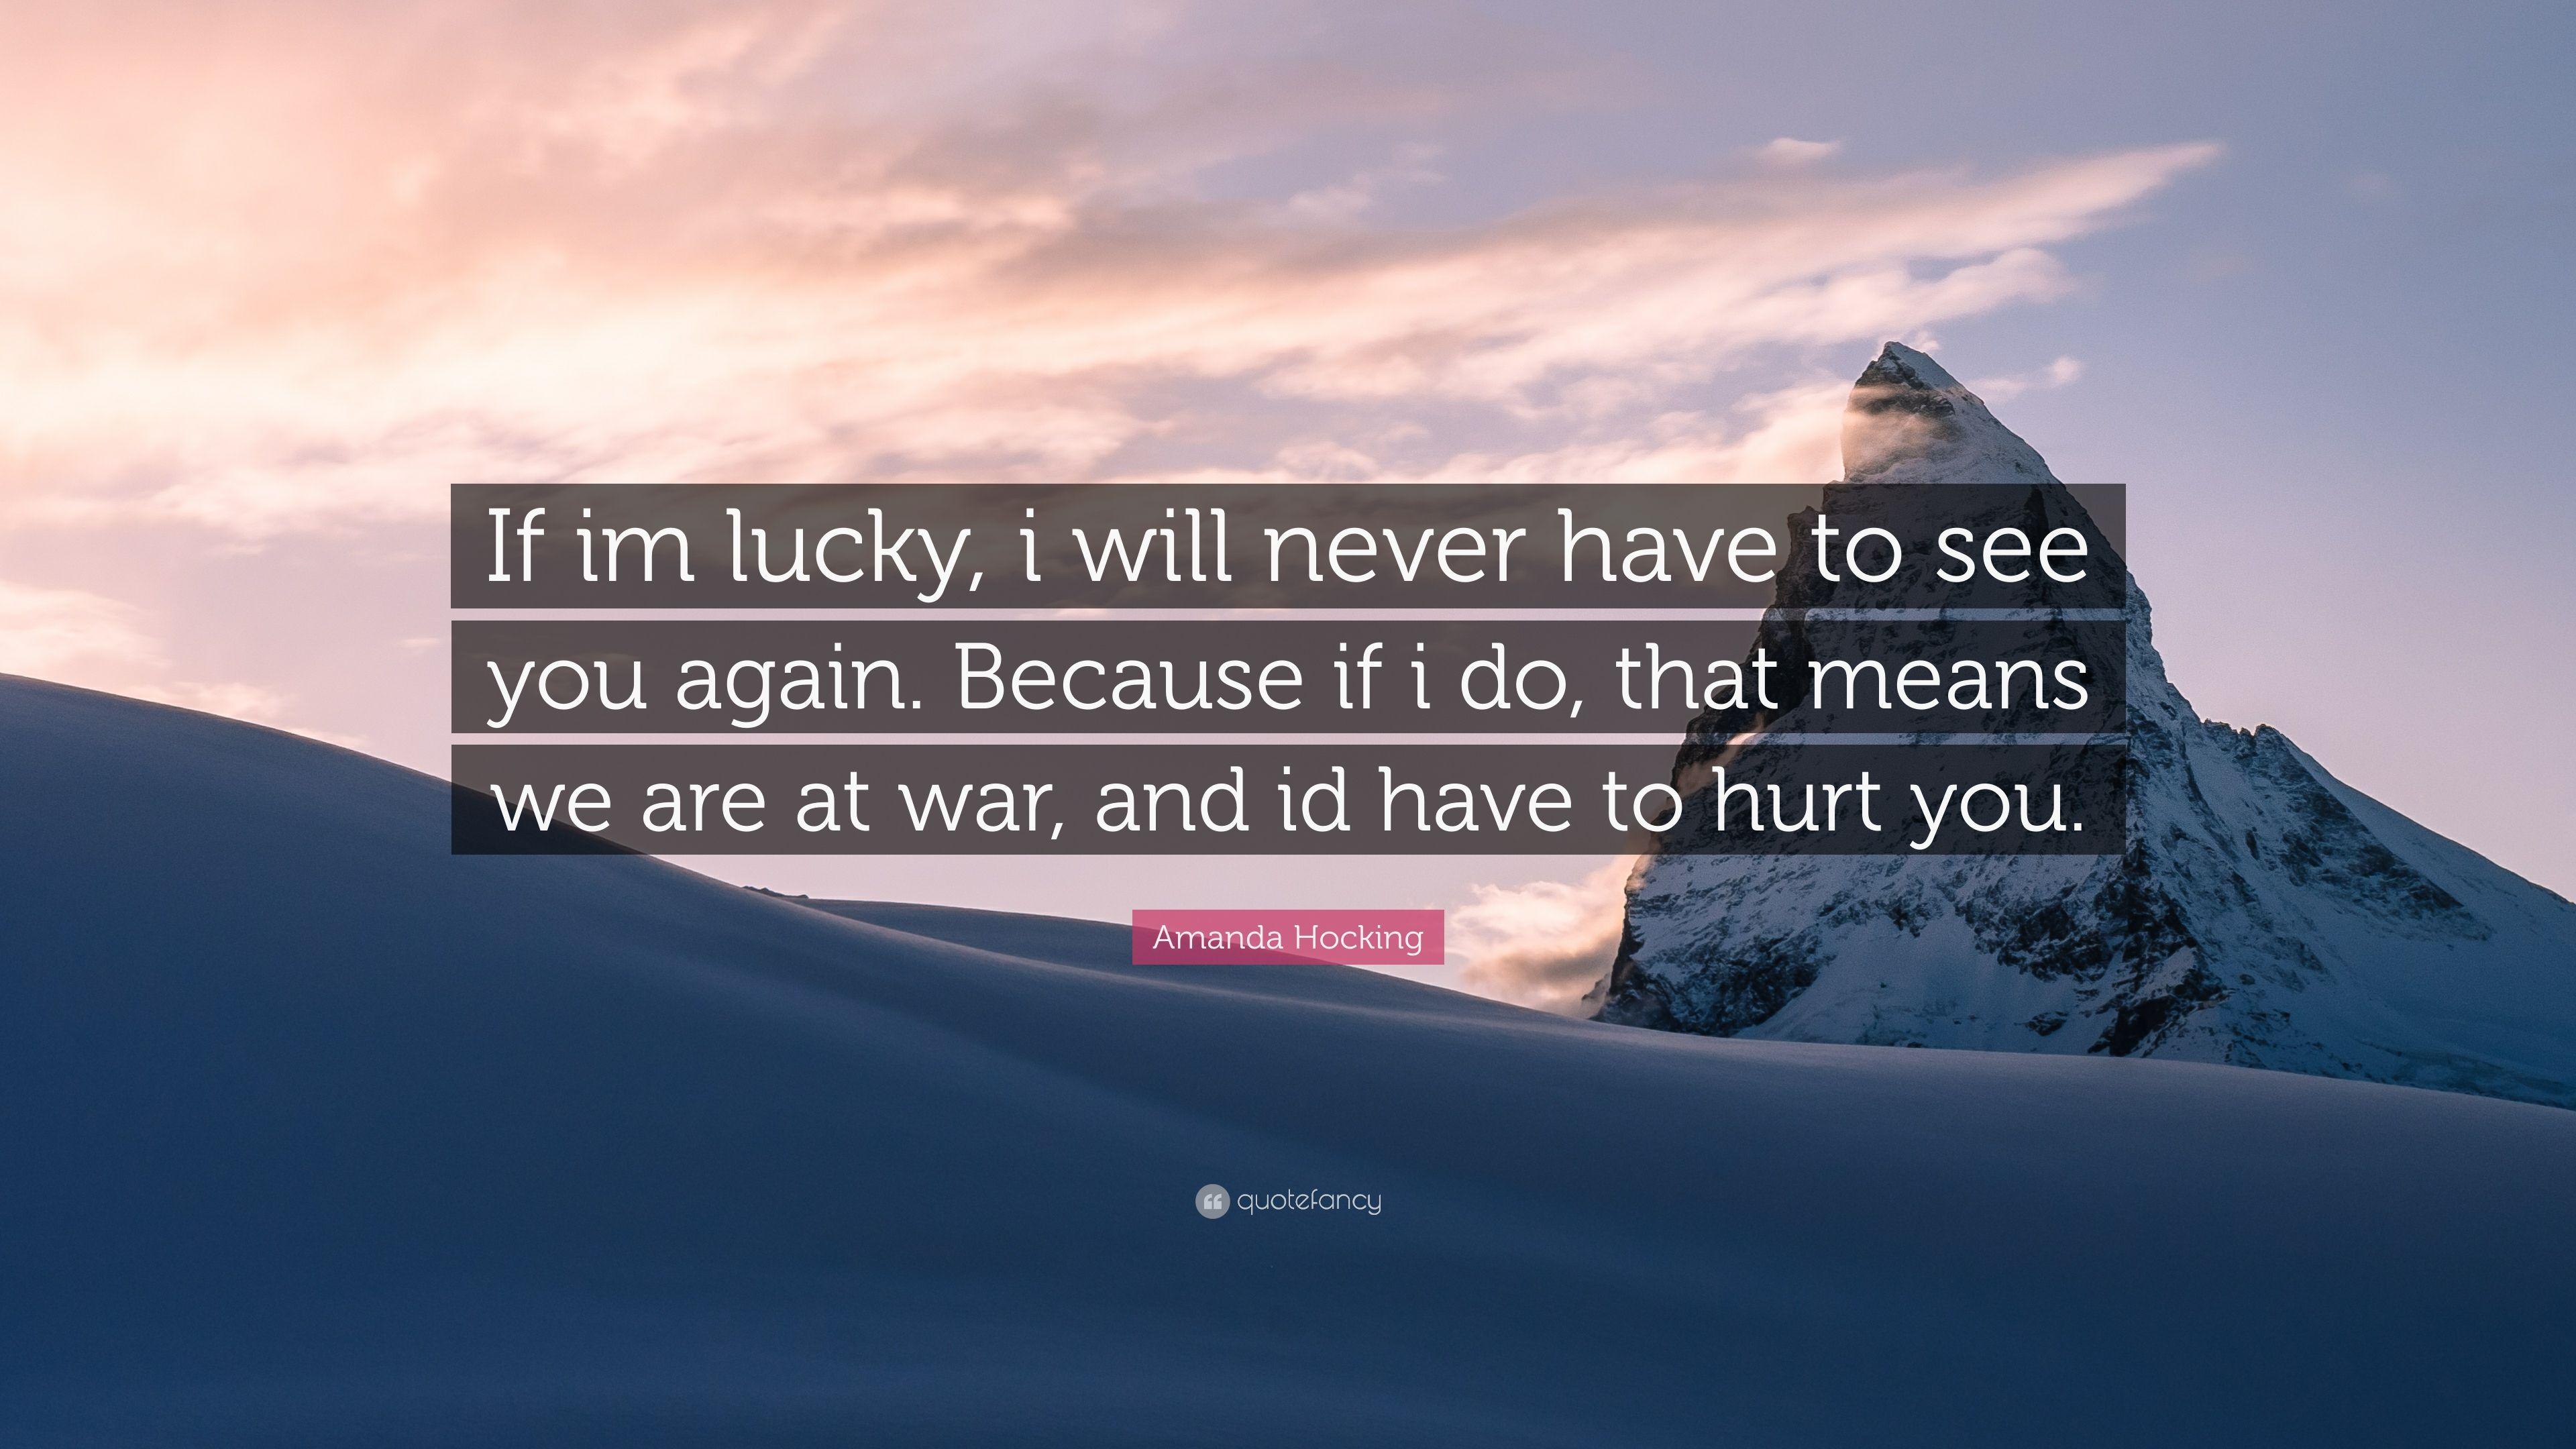 Amanda Hocking Quote: “If im lucky, i will never have to see you